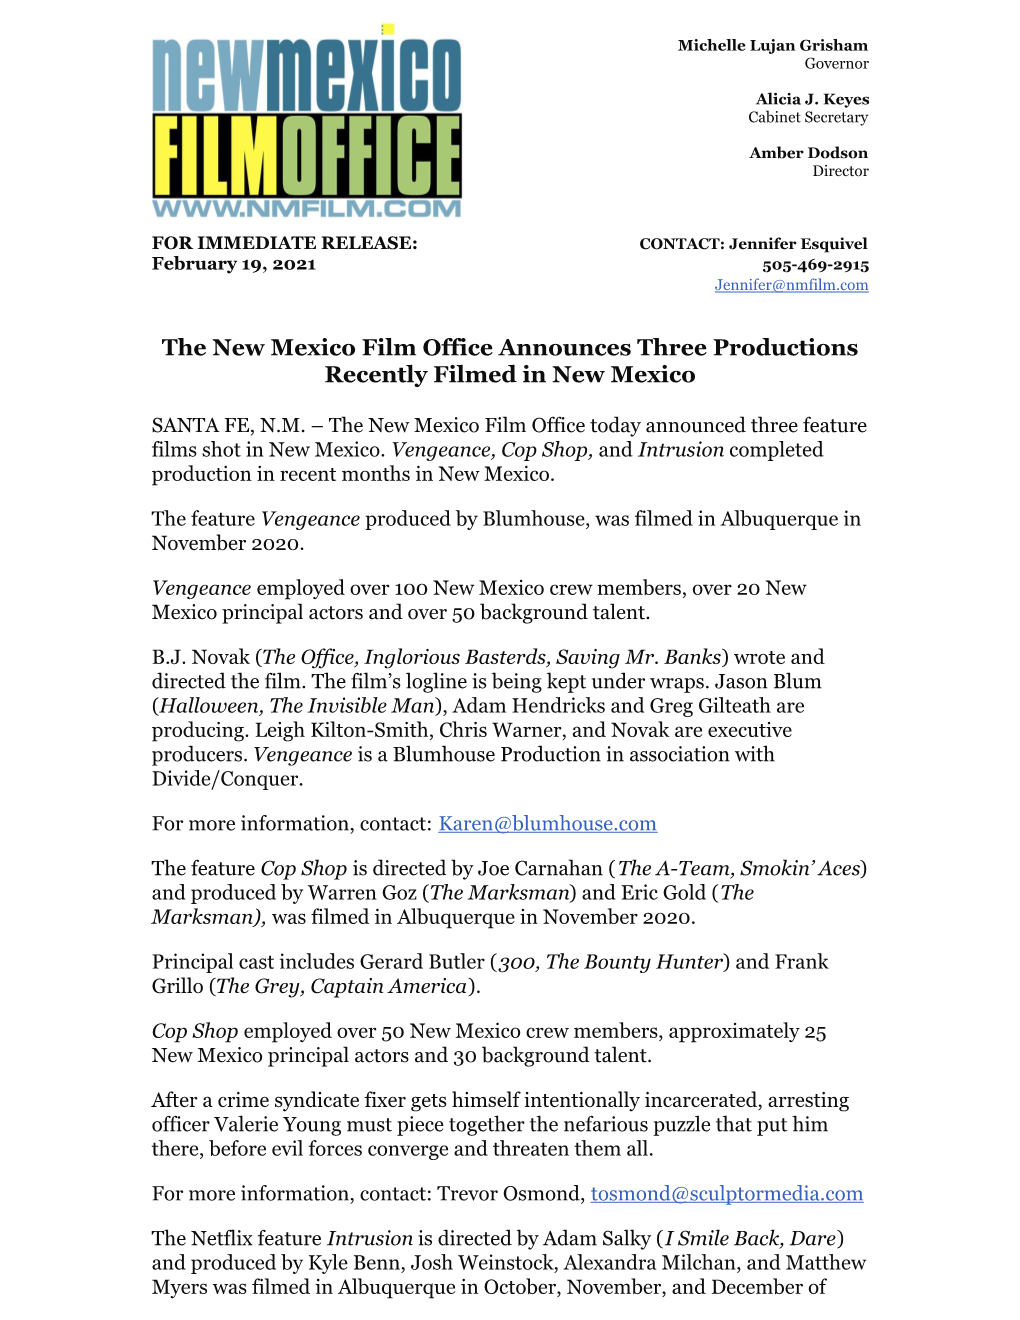 The New Mexico Film Office Announces Three Productions Recently Filmed in New Mexico